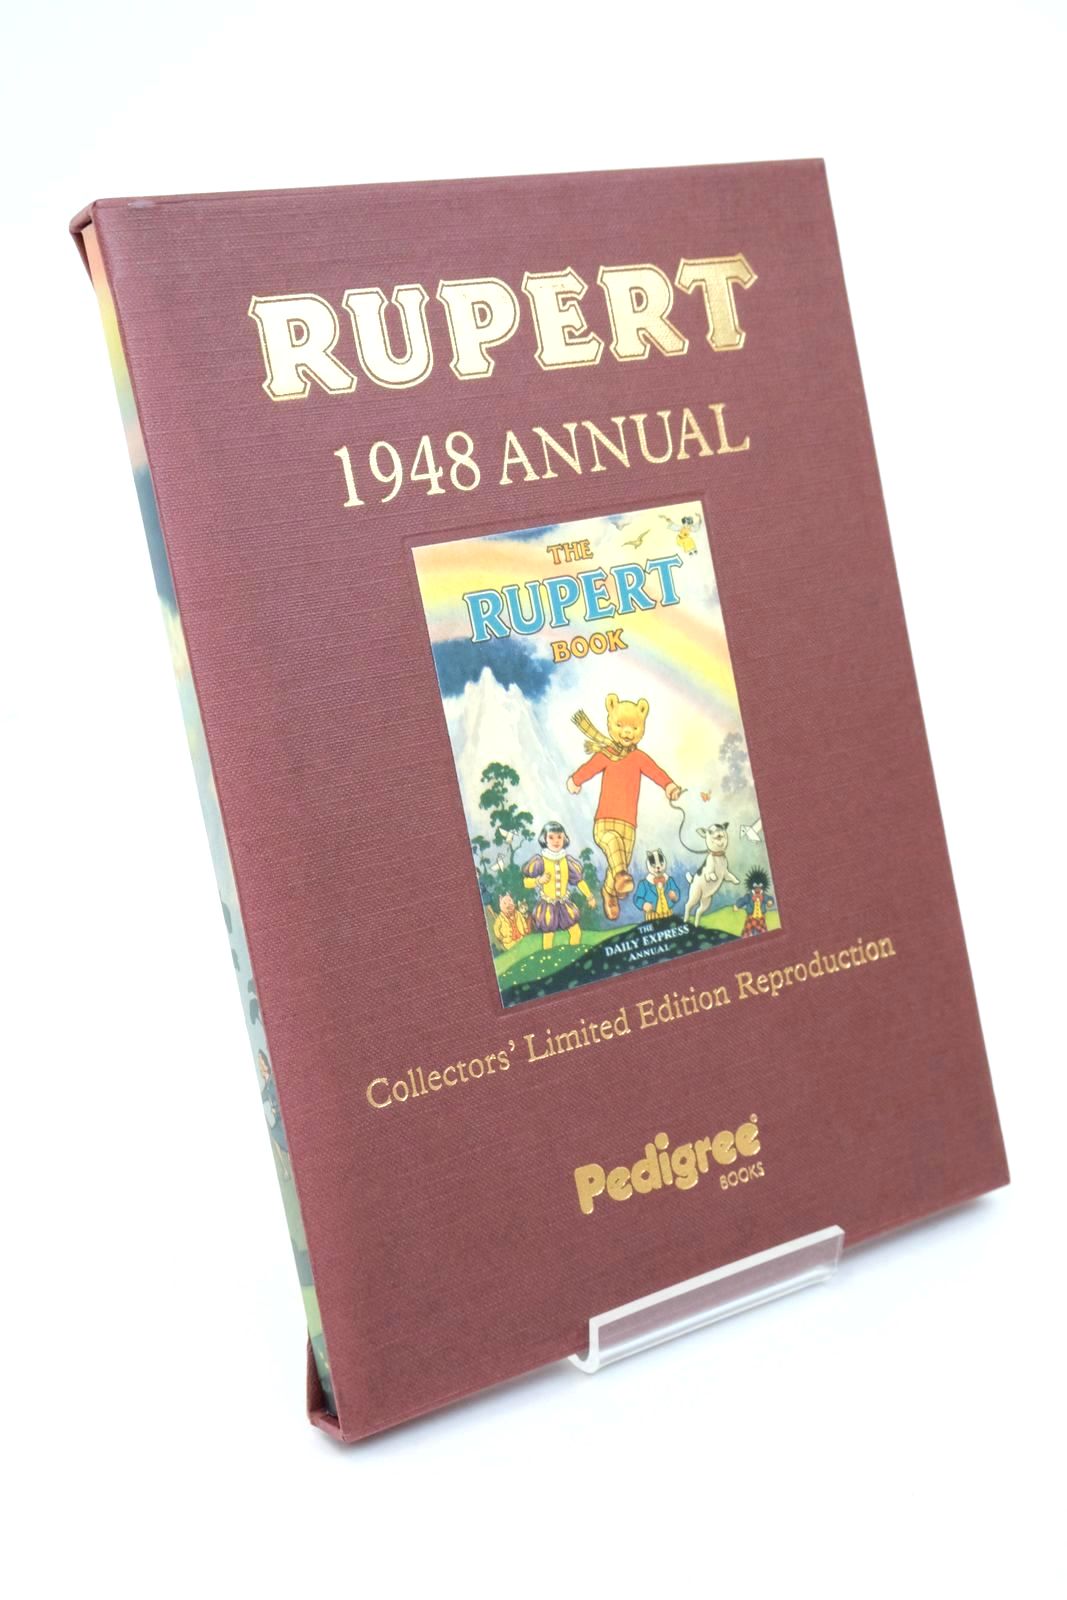 Photo of RUPERT ANNUAL 1948 (FACSIMILE) - THE RUPERT BOOK written by Bestall, Alfred illustrated by Bestall, Alfred published by Pedigree Books Limited (STOCK CODE: 1322862)  for sale by Stella & Rose's Books